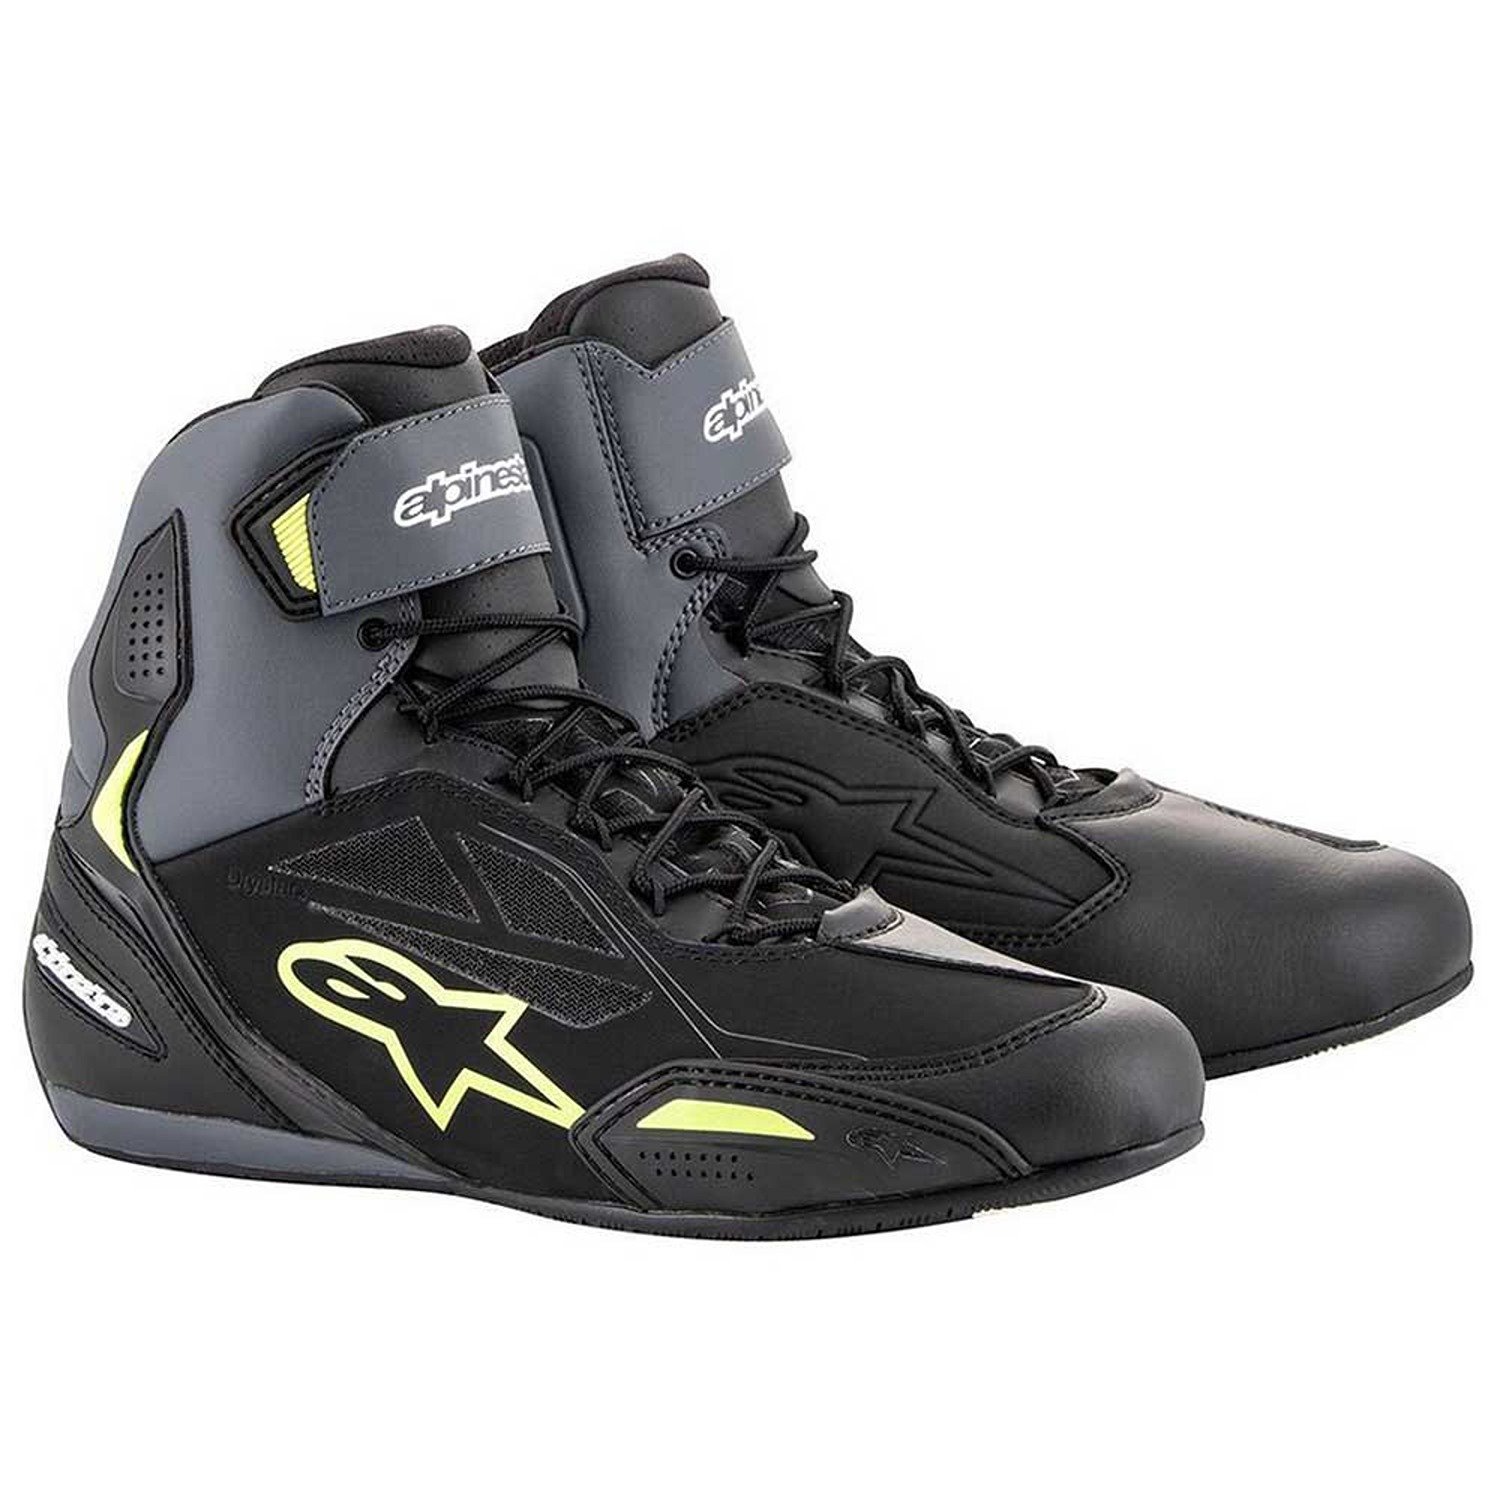 Image of EU Alpinestars Faster-3 Shoes Black Yellow Fluo Taille US 14